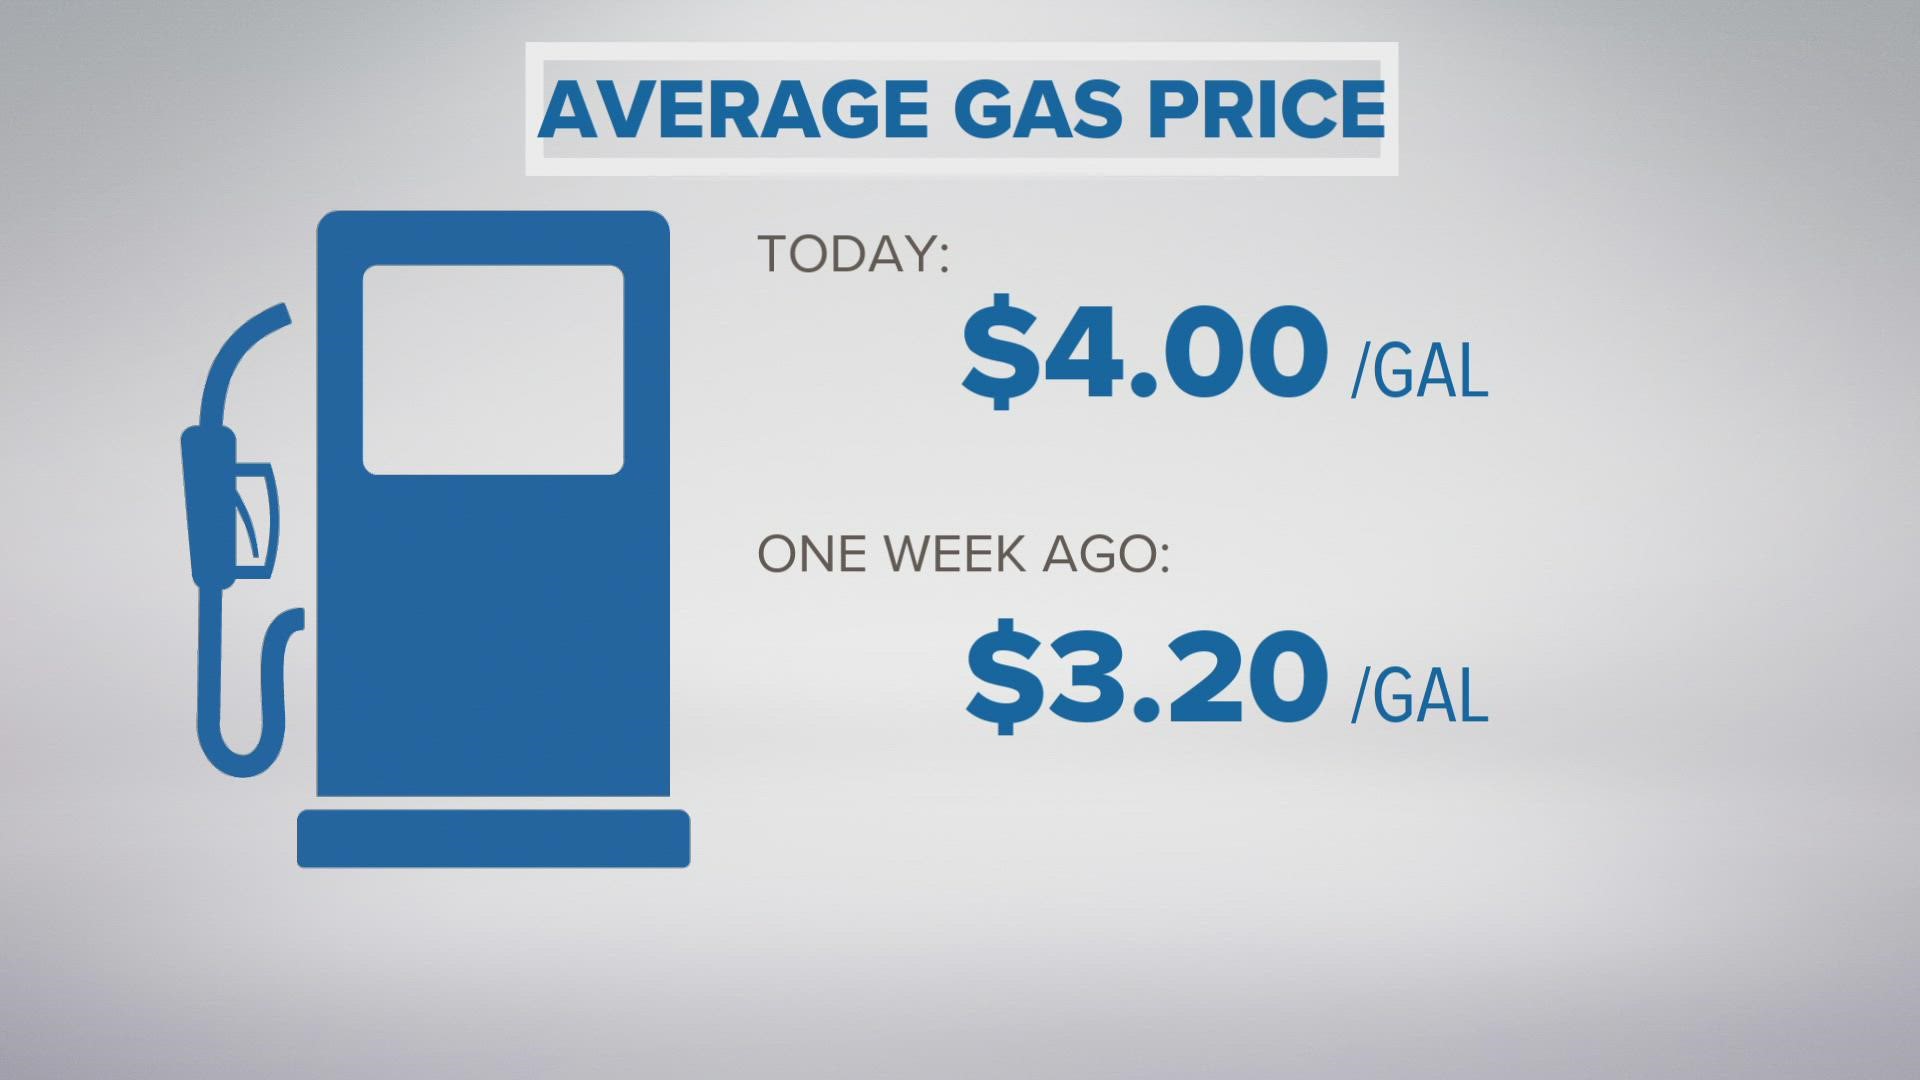 AAA offers several tips to help make that very expensive tank of gas last longer.